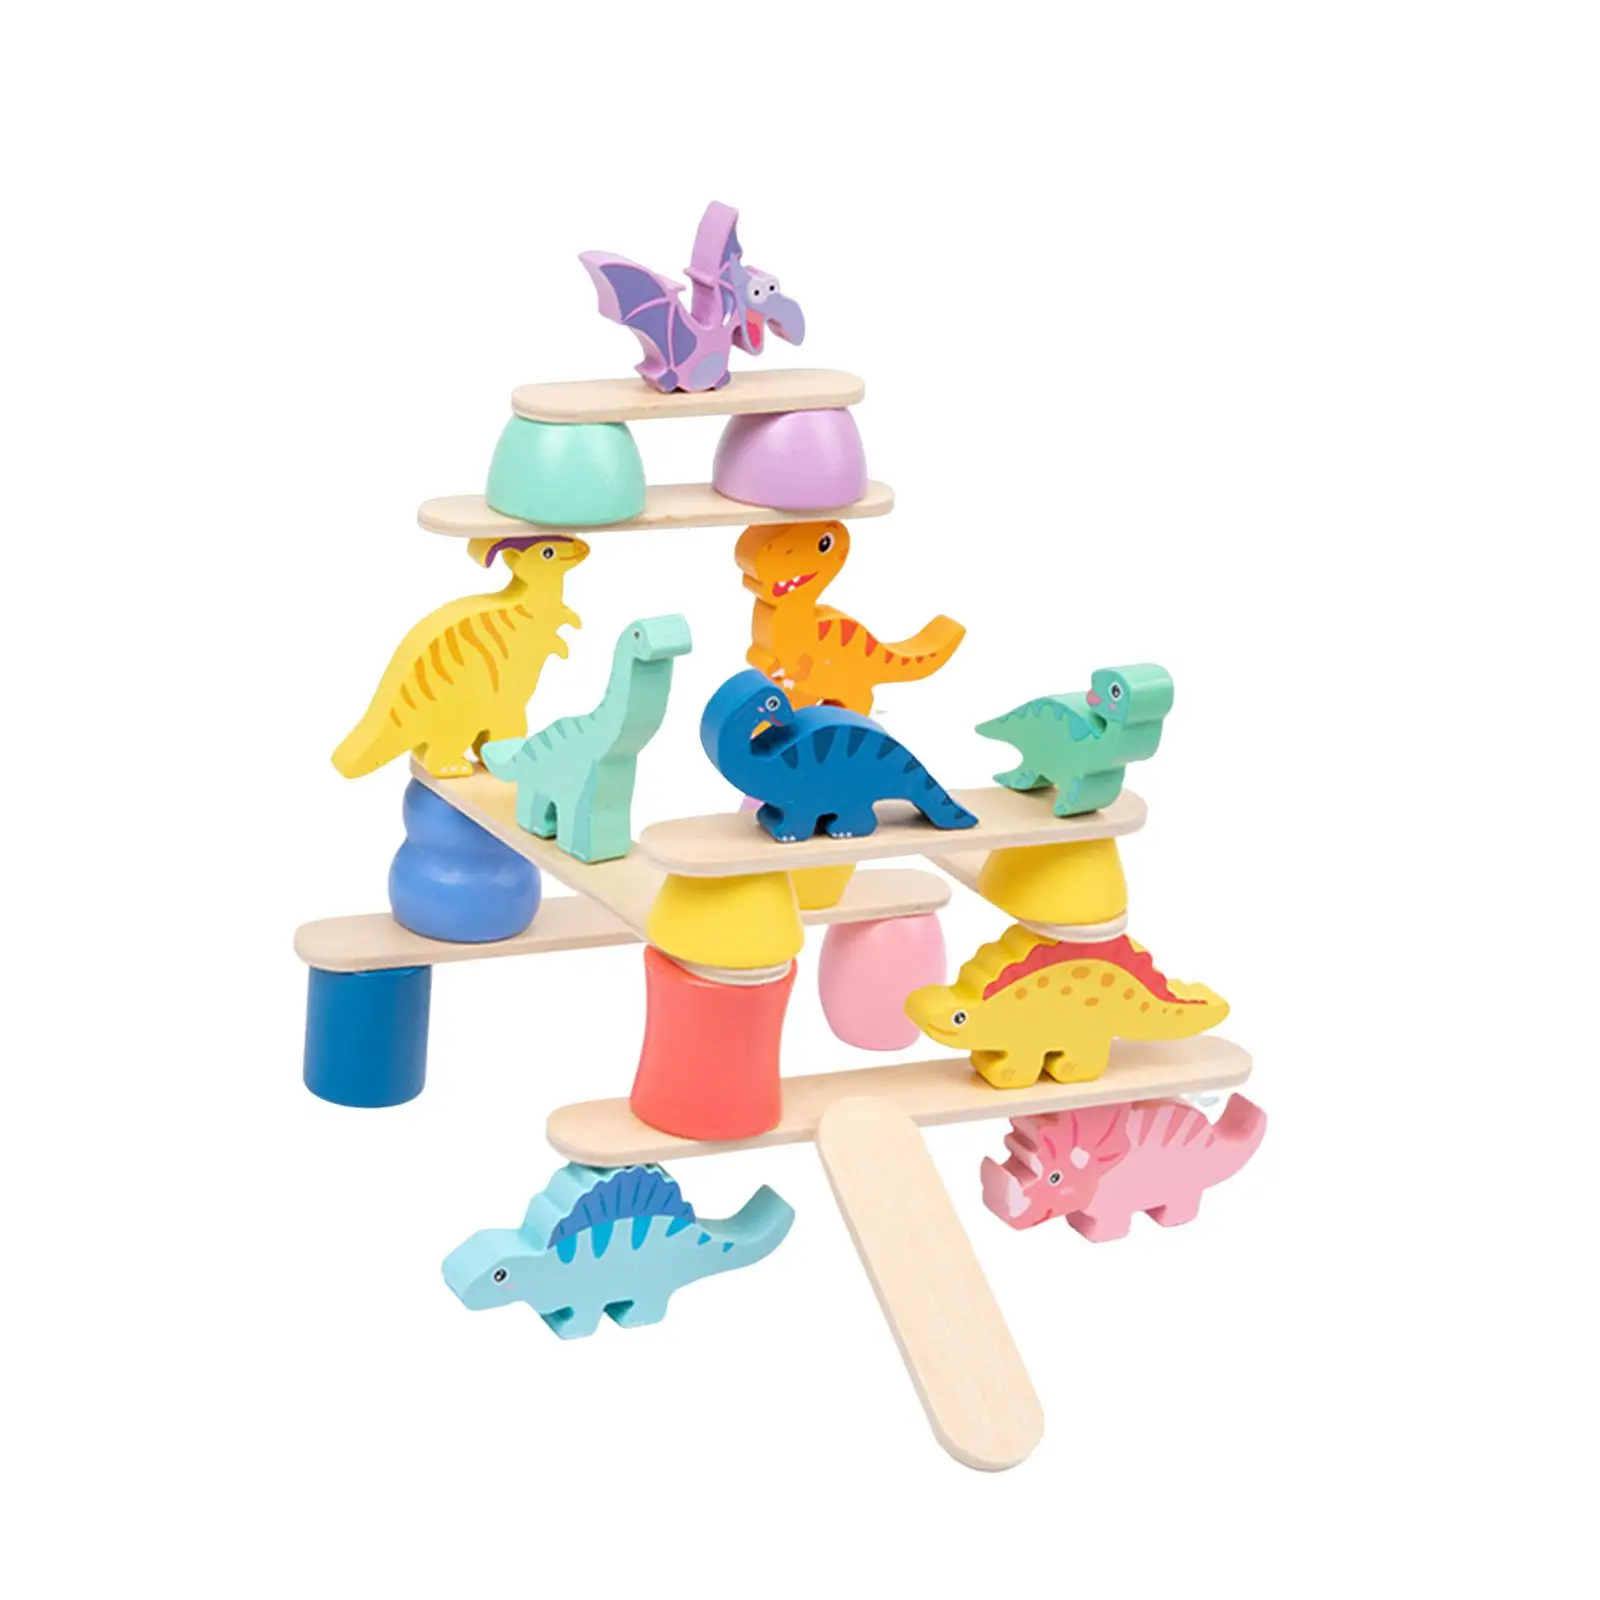 Sorting Skill Developing Intelligence Play Kits Wooden Dinosaur Stacking Balancing Block Puzzle Game for Toddlers Children Gifts